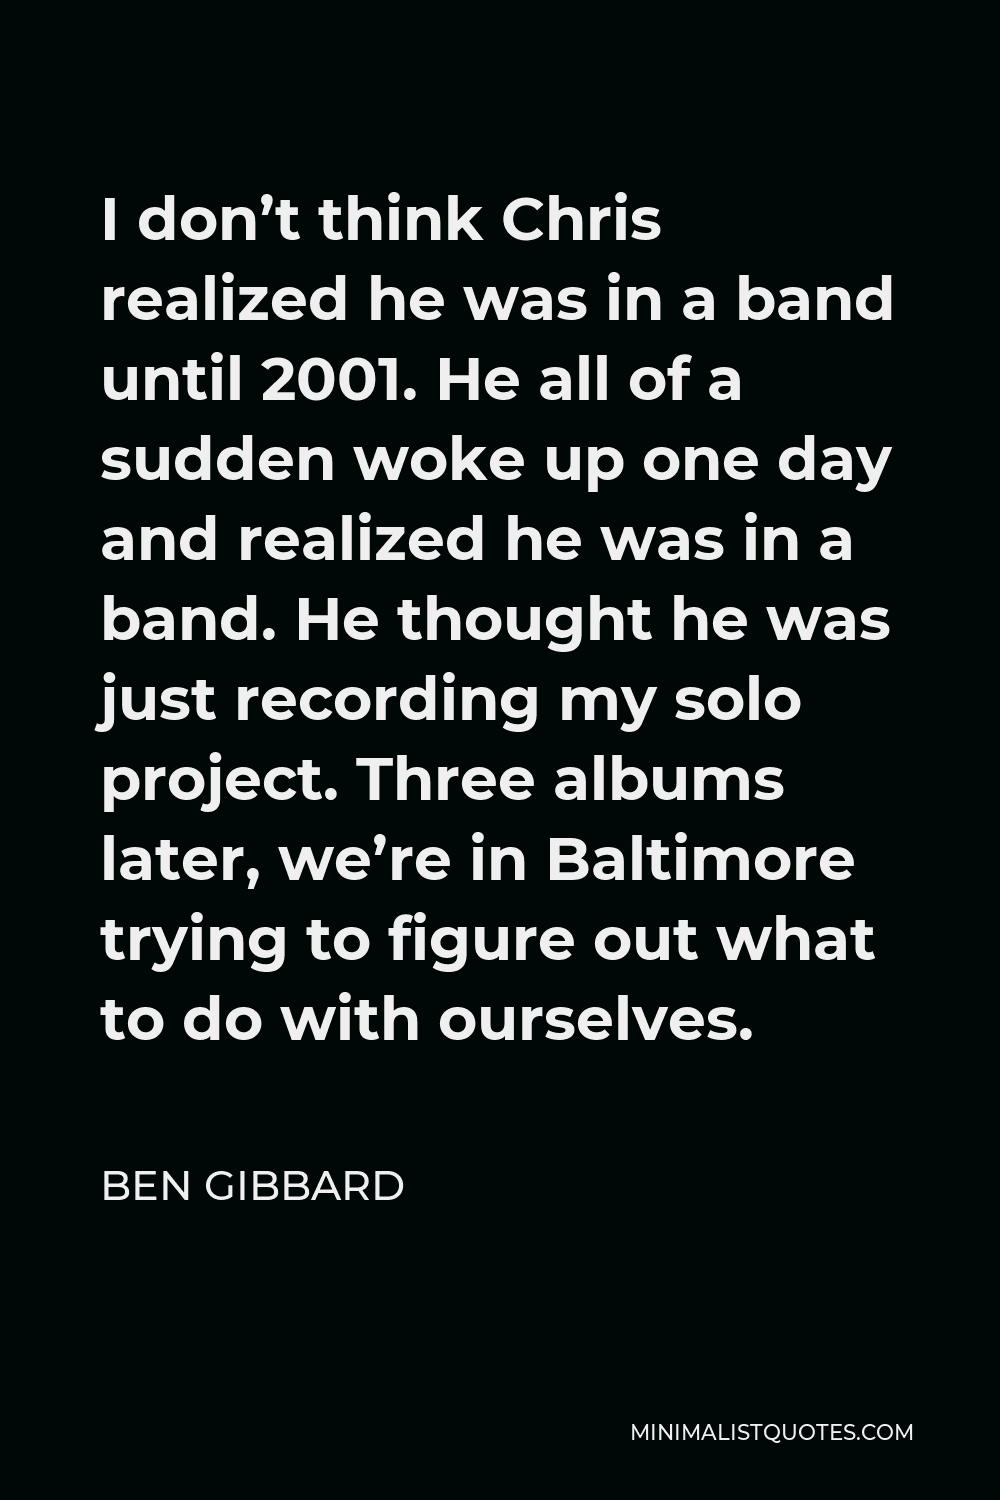 Ben Gibbard Quote - I don’t think Chris realized he was in a band until 2001. He all of a sudden woke up one day and realized he was in a band. He thought he was just recording my solo project. Three albums later, we’re in Baltimore trying to figure out what to do with ourselves.